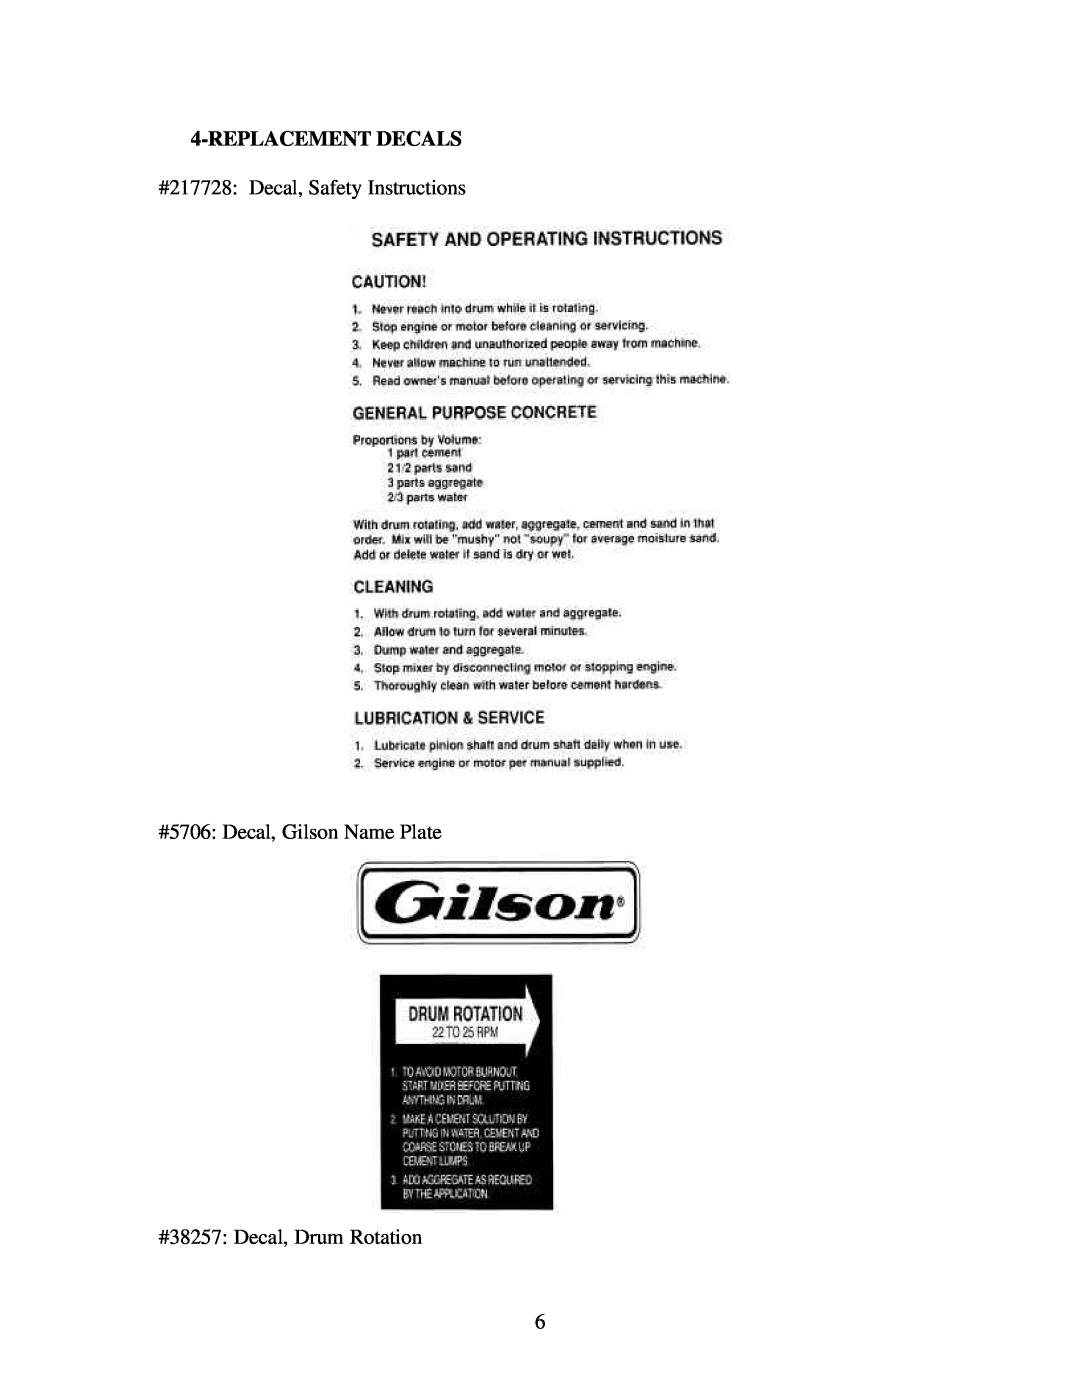 Gilson 59015C manual Replacementdecals, #217728 Decal, Safety Instructions, #5706 Decal, Gilson Name Plate 